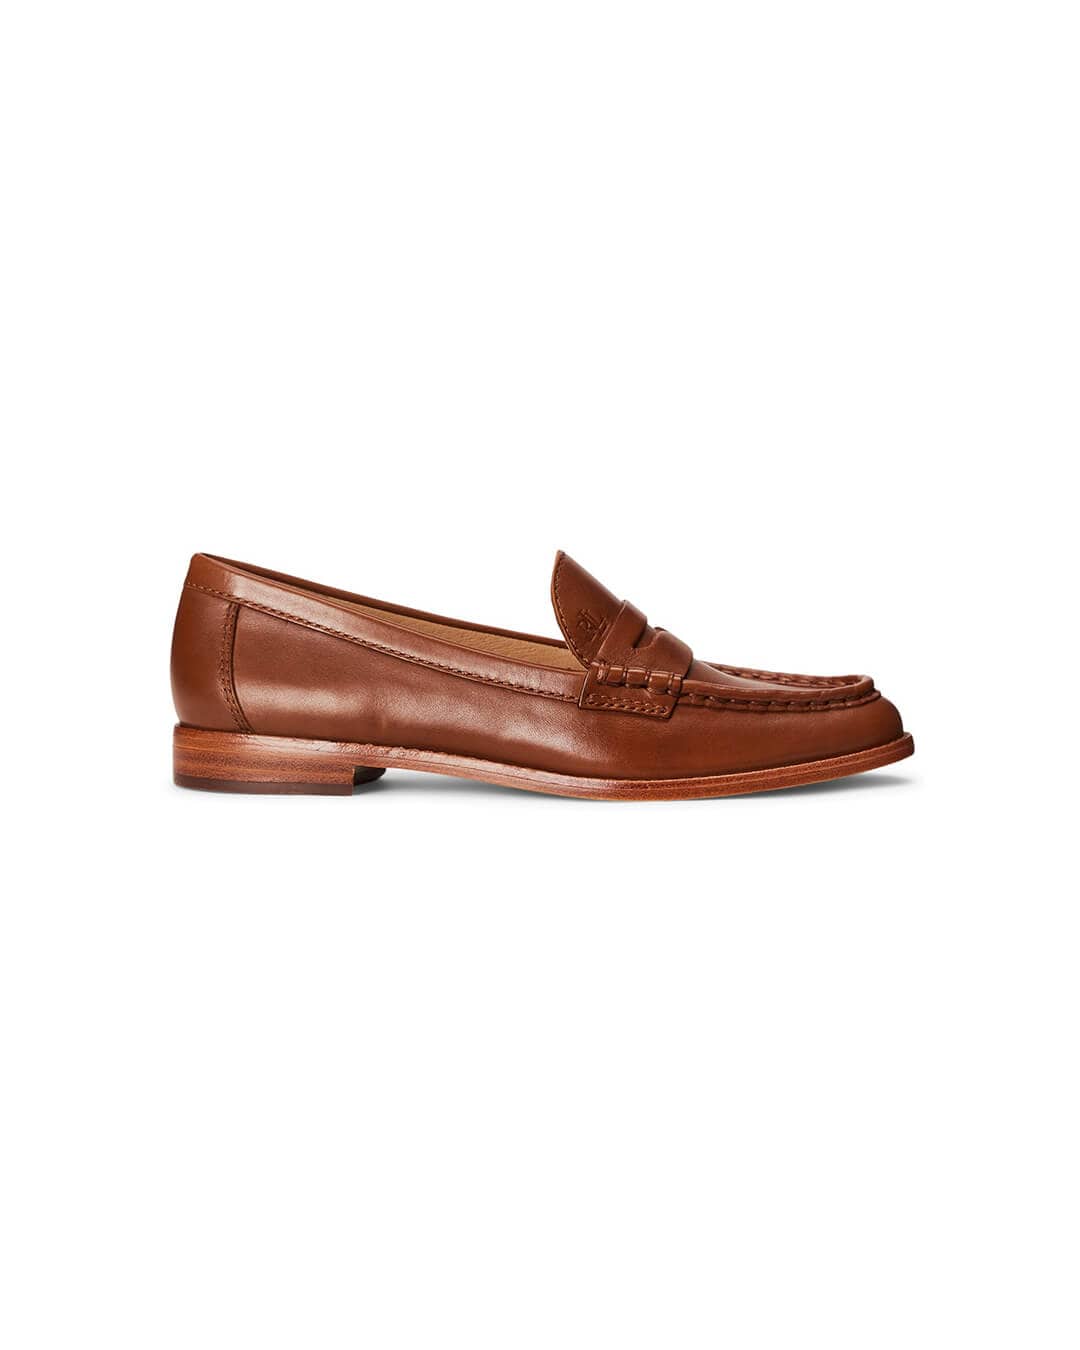 Lauren By Ralph Lauren Shoes Lauren by Ralph Lauren Brown Wynnie Burnished Leather Loafer